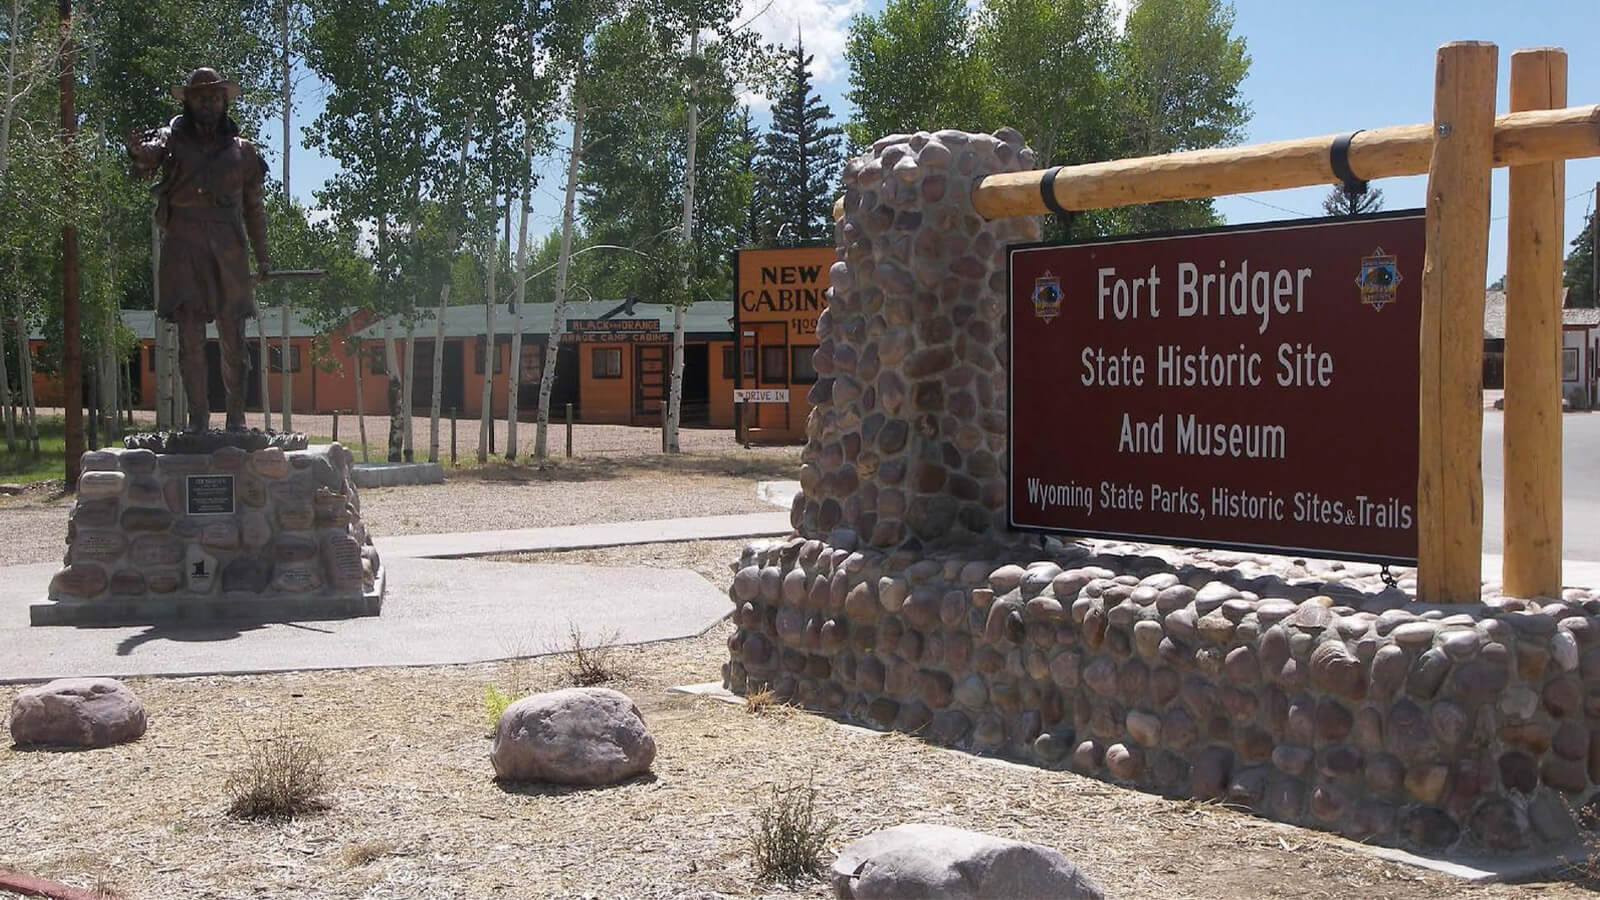 Fort Bridger State Historic Site and Museum sign